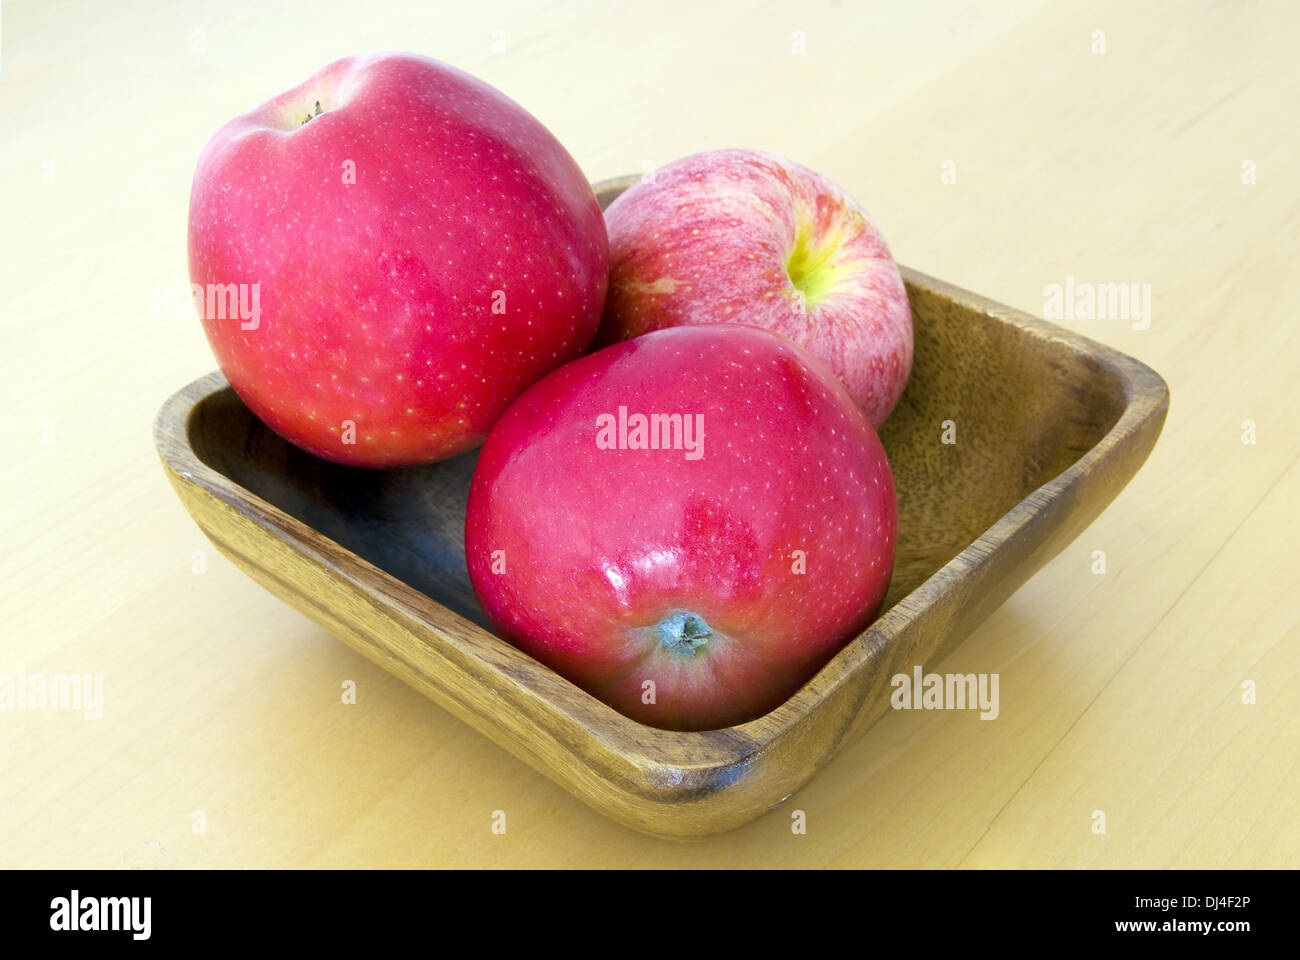 3 apples in a wooden bowl Stock Photo